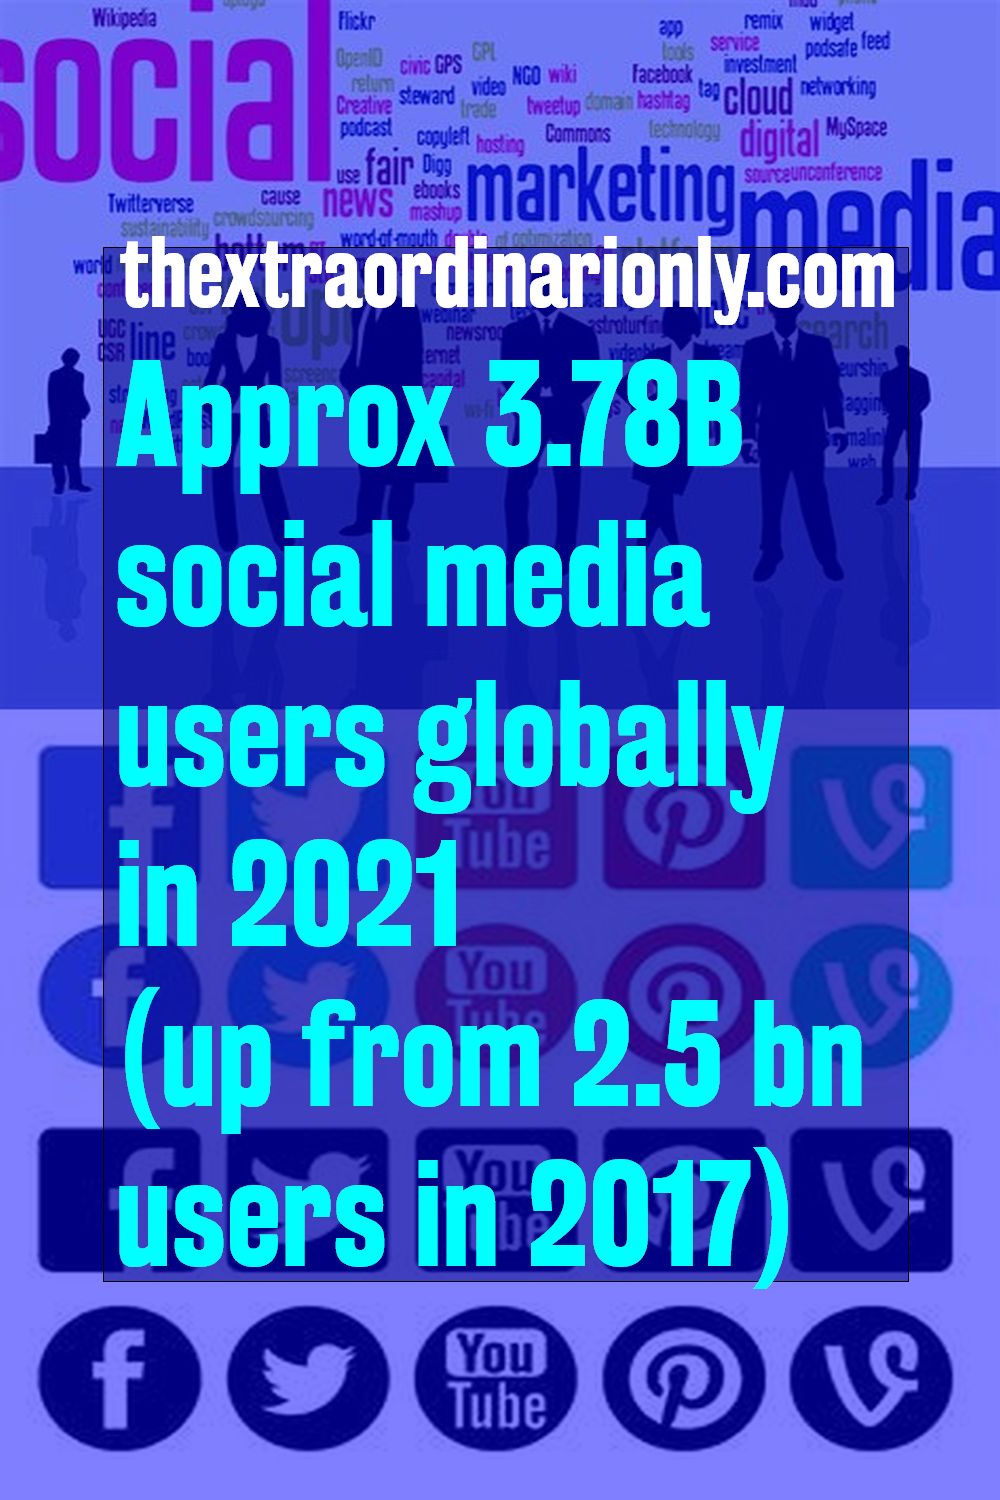 Globally there are approximately 3.78B social media users in 2021 (up from 2.5 billion users in 2017)